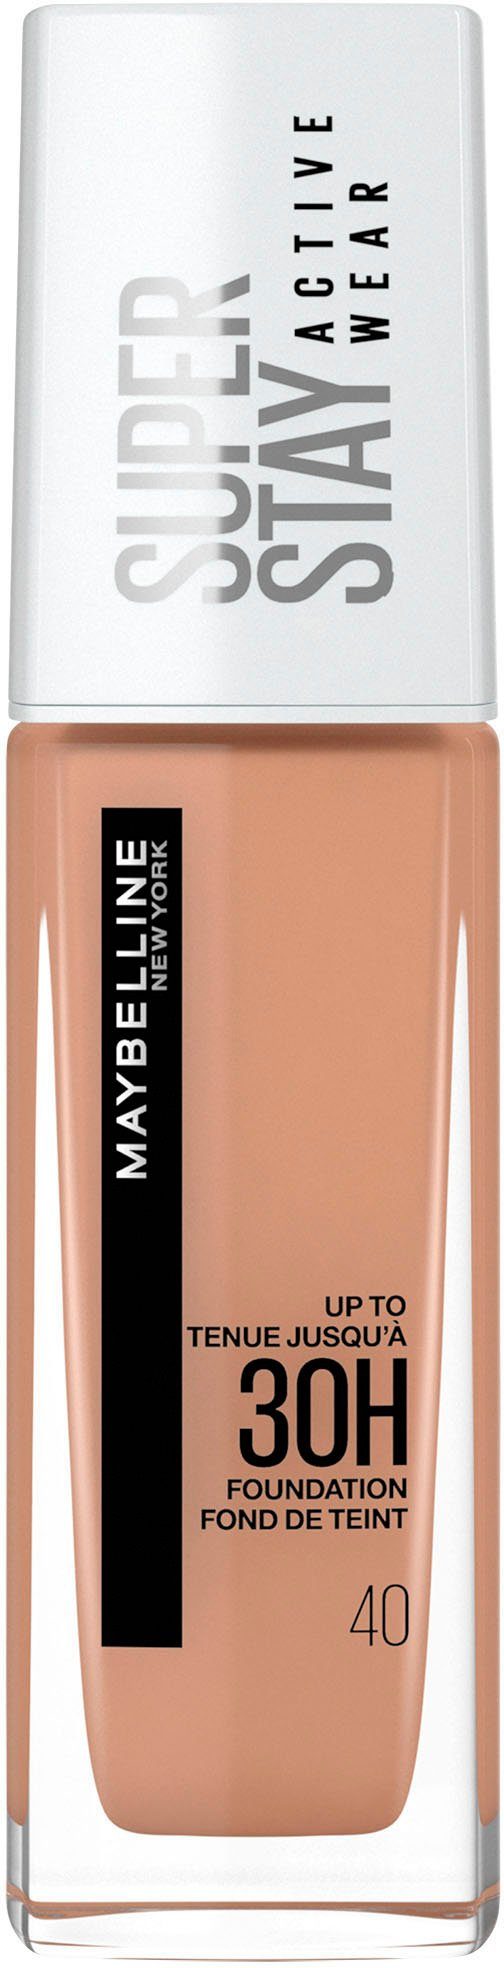 MAYBELLINE NEW YORK Foundation Super Fawn 40 Wear Stay Active